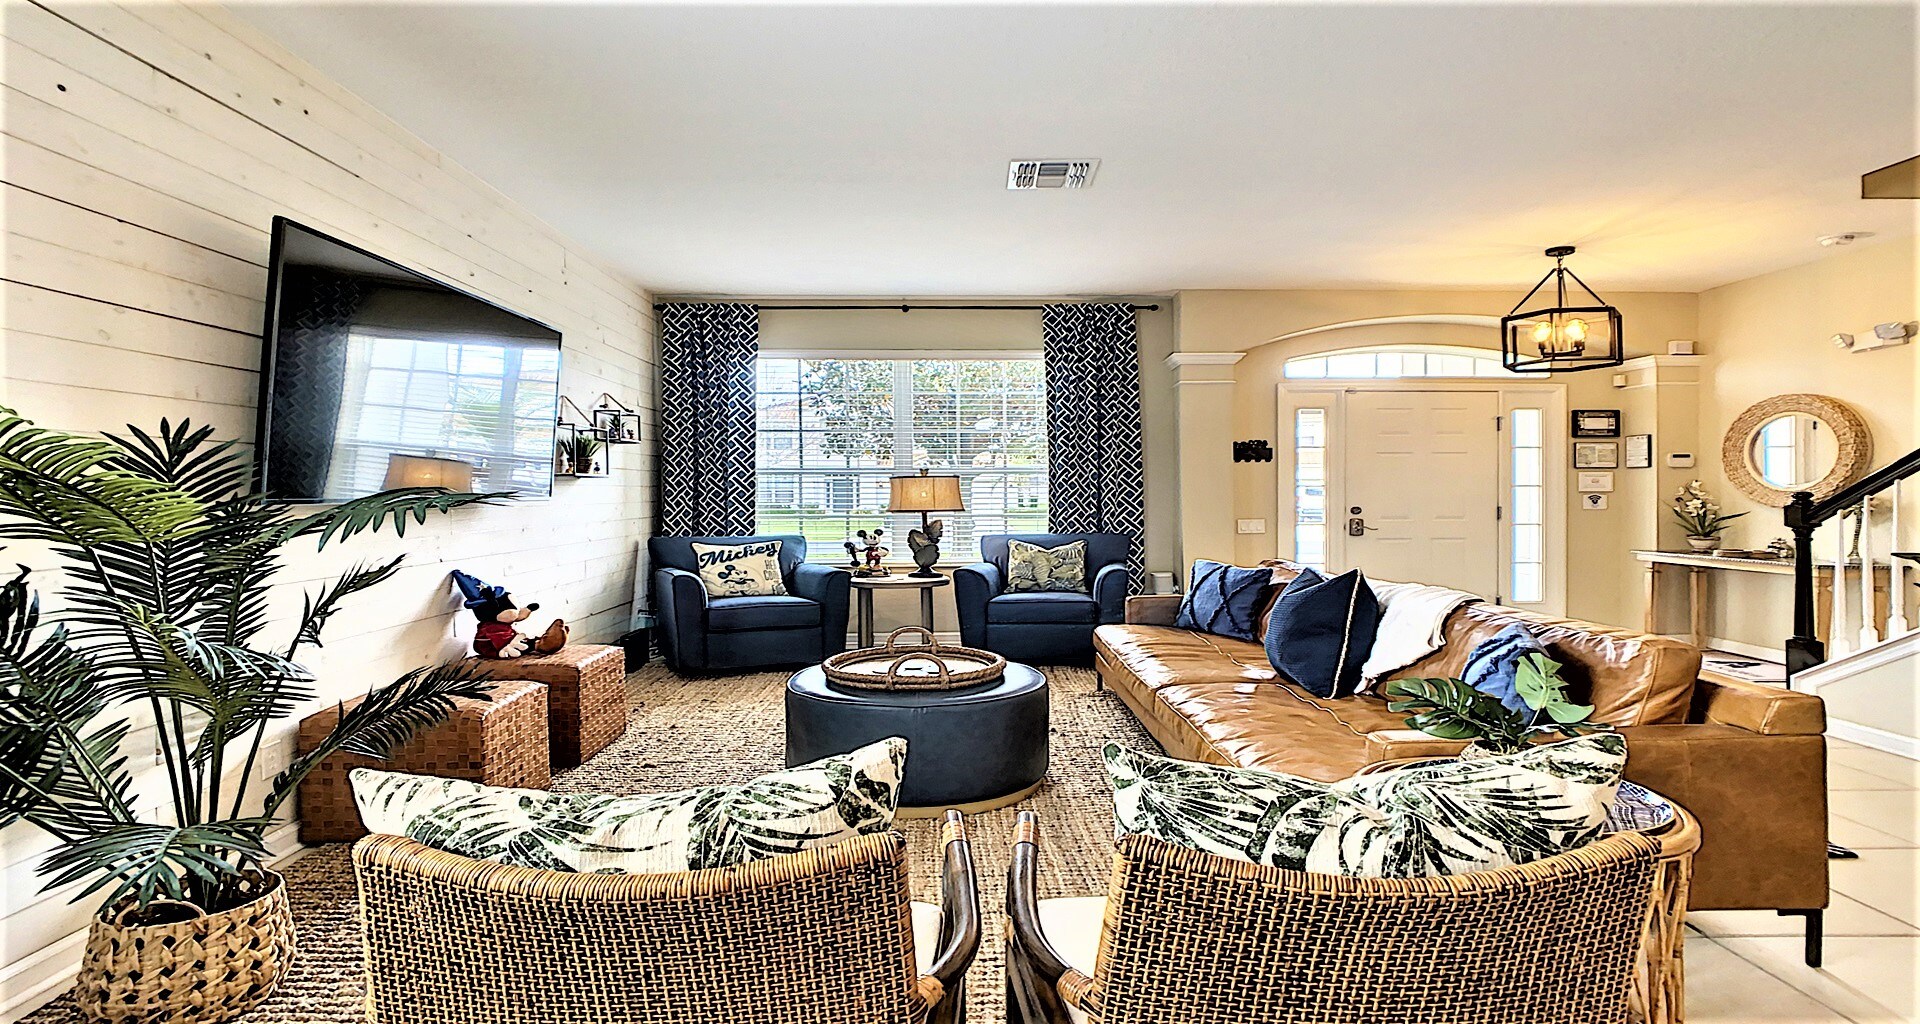 Spacious living room area with luxury cozy sofa, perfect for family reunion